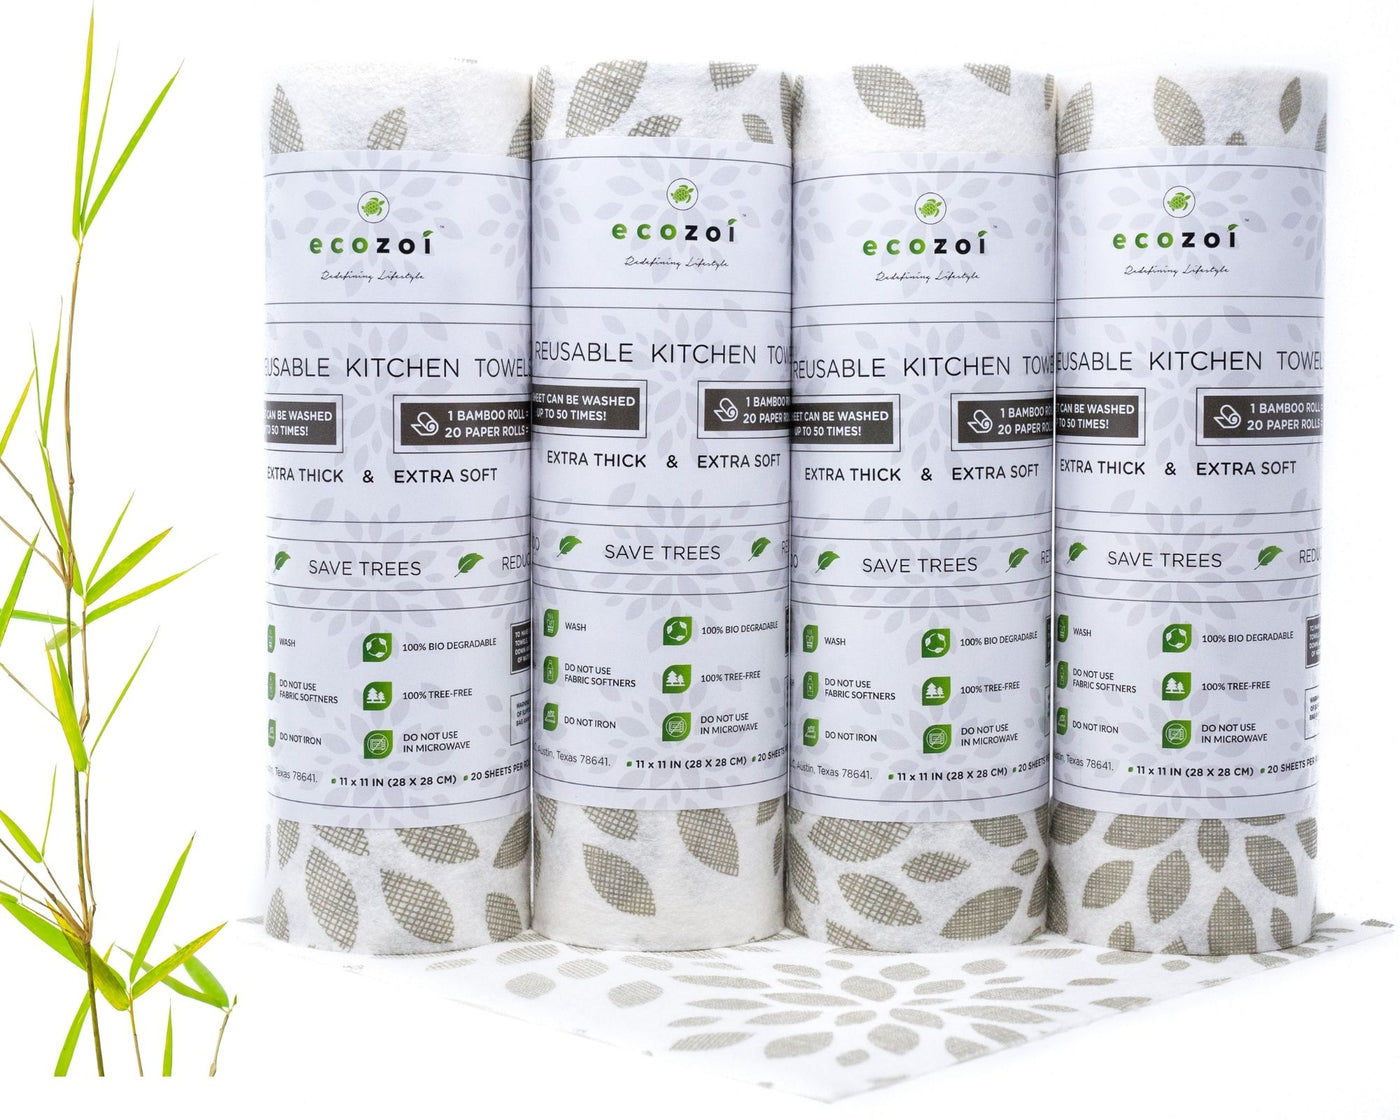 Bilot Reusable Bamboo Paper Towels - Super Absorbent, Biodegradable, and  Extra Large (3 Pack, 30 Rolls, 12x11 Inches) 